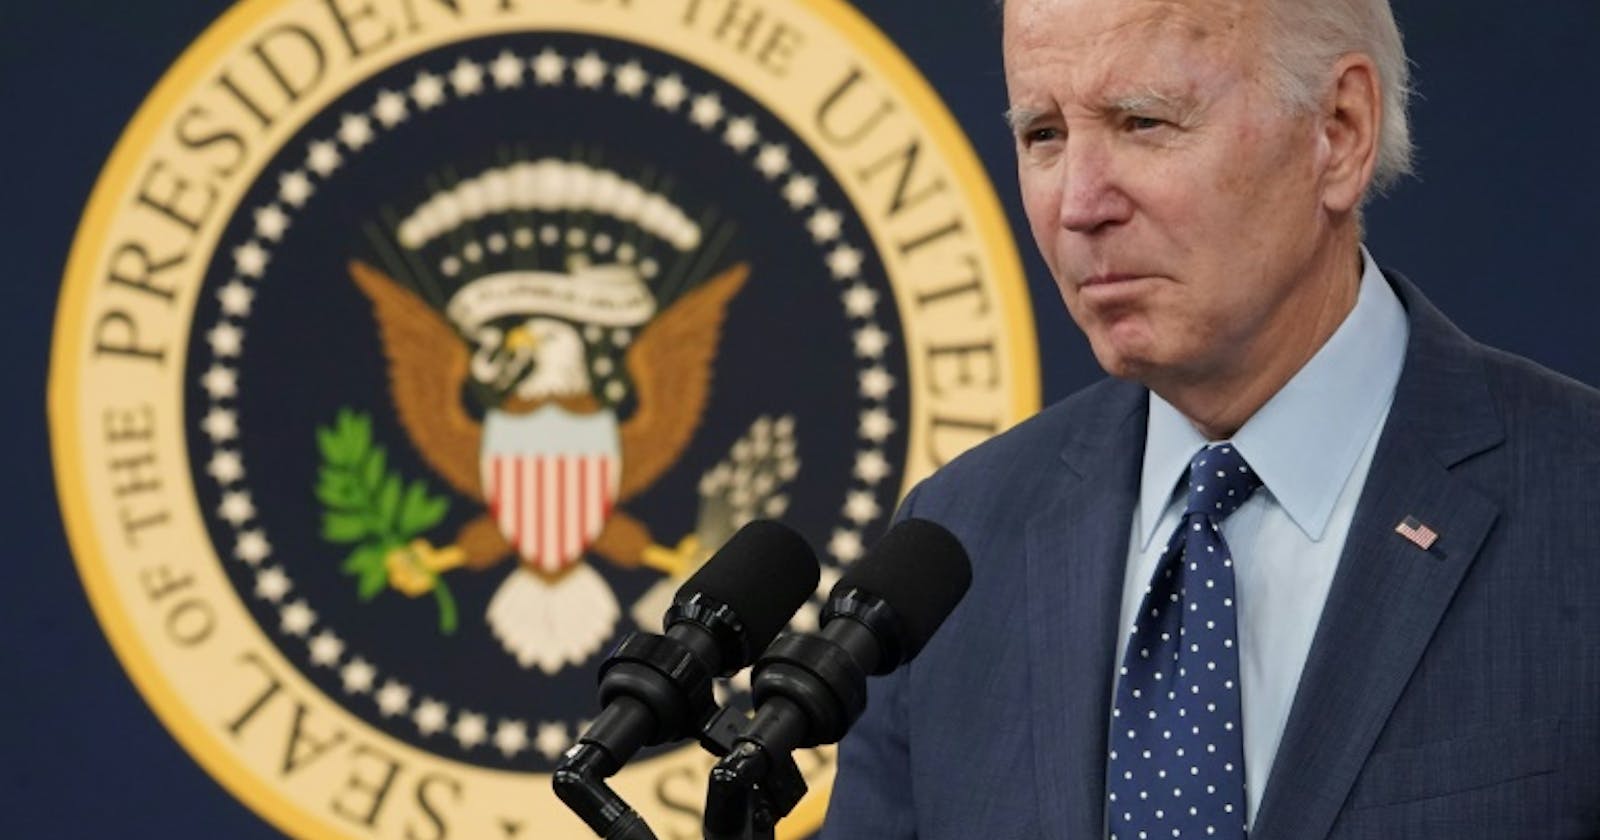 Biden’s speech will take place less than 500 miles from Ukraine